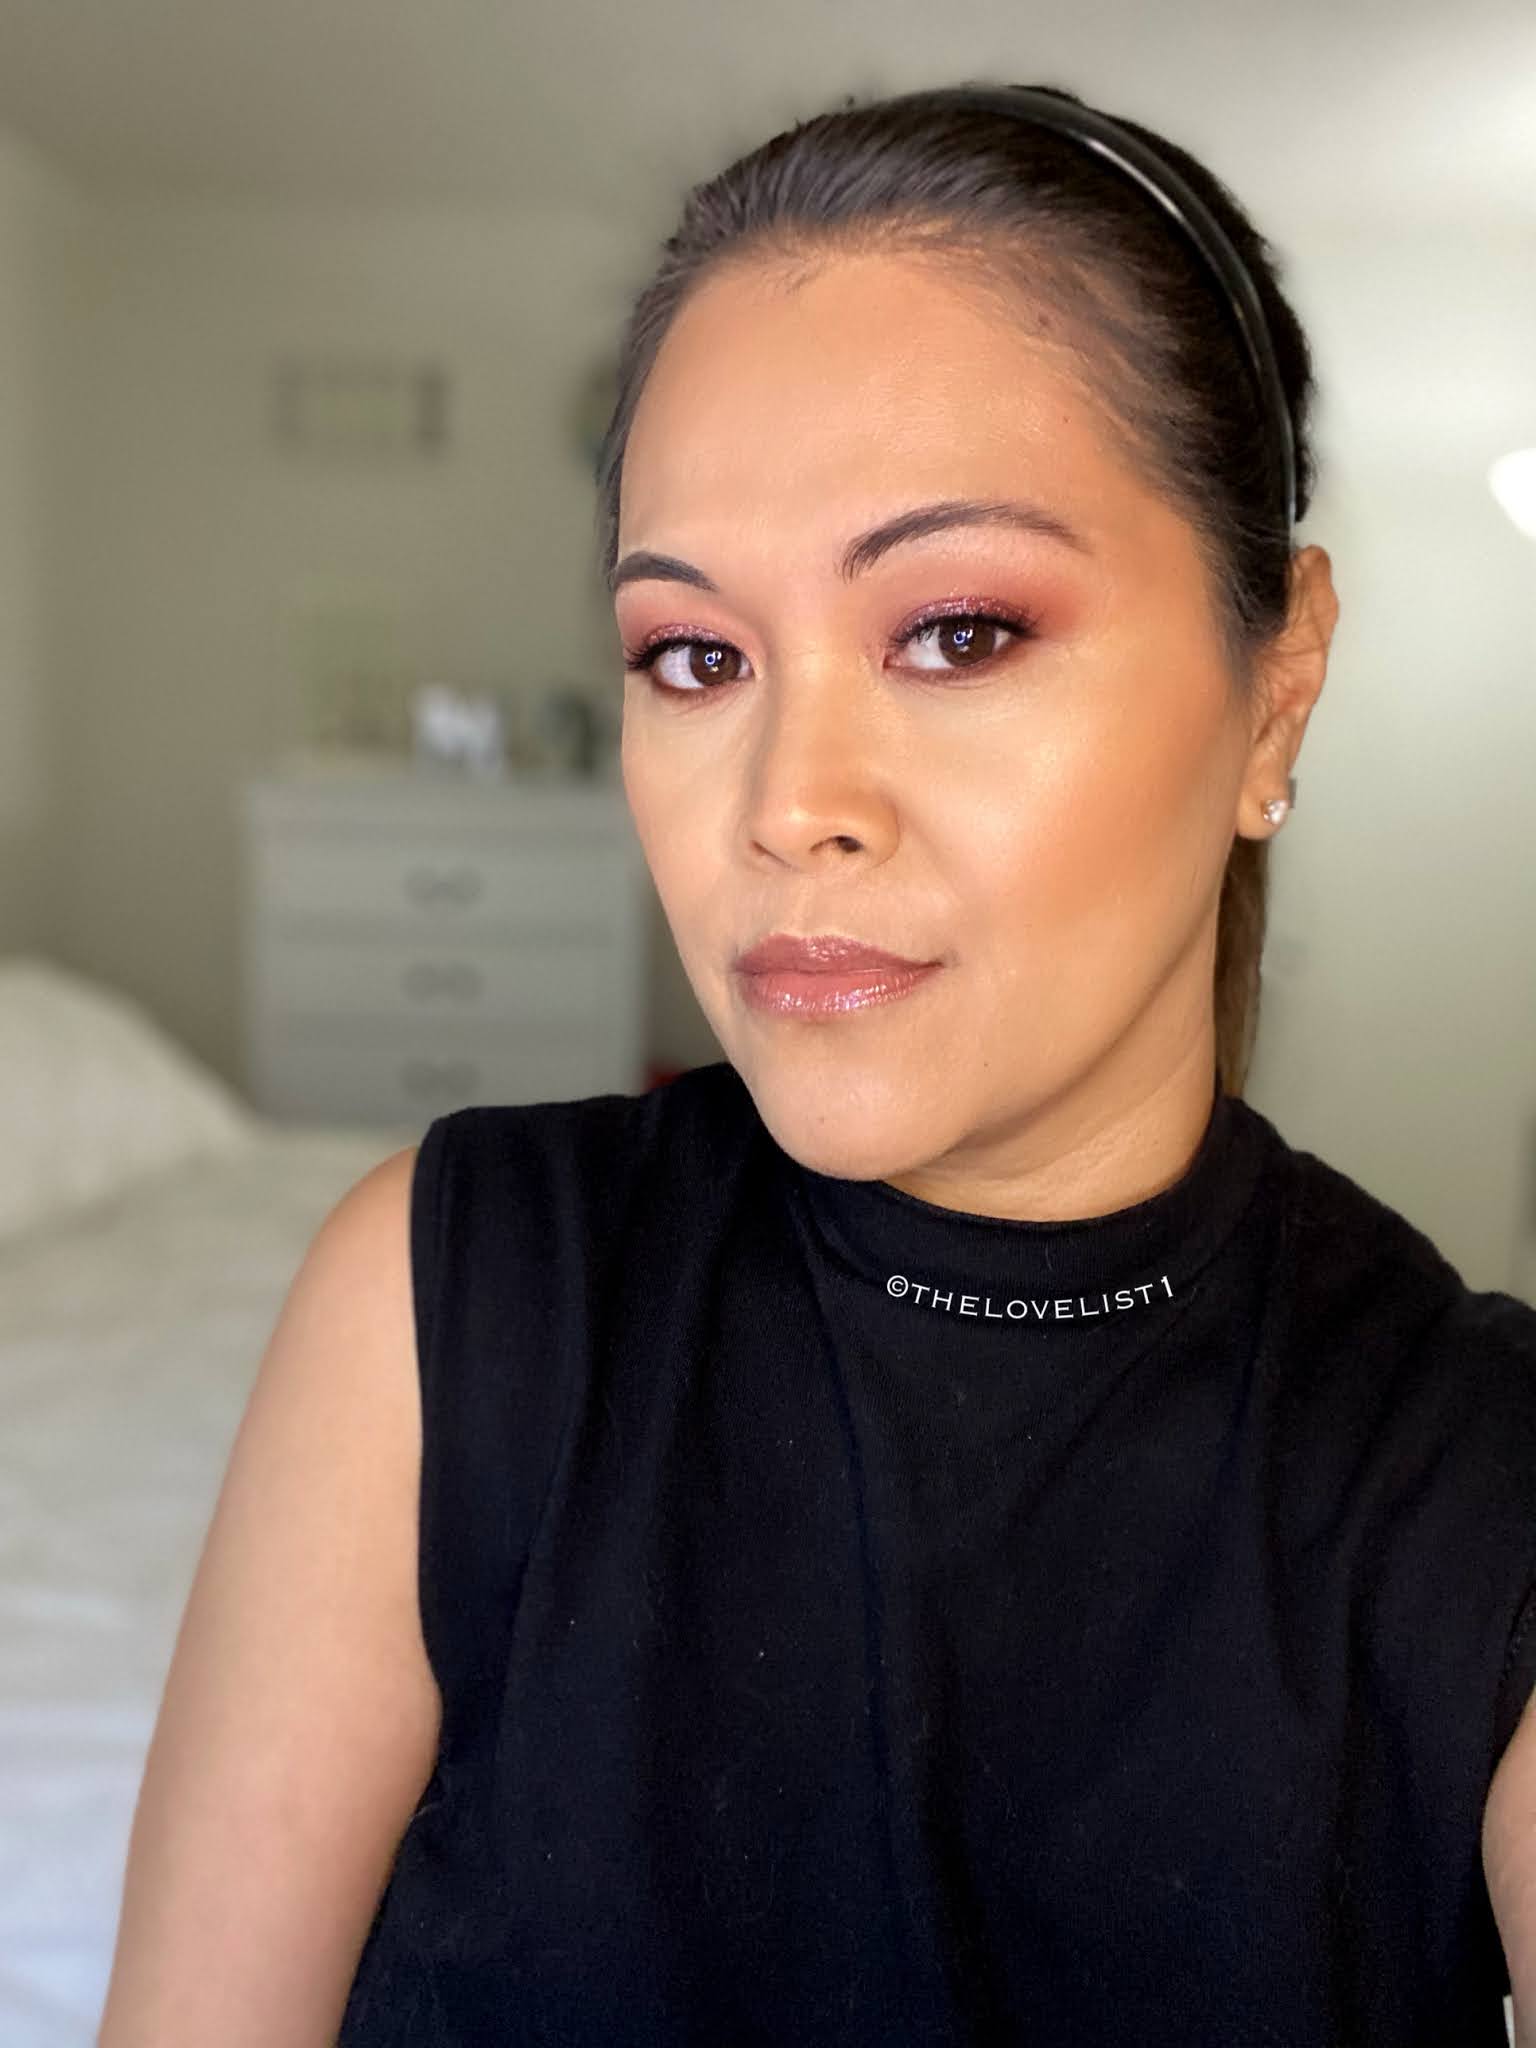 Product Review  Jaclyn Cosmetics Accent Light Highlighter Palette